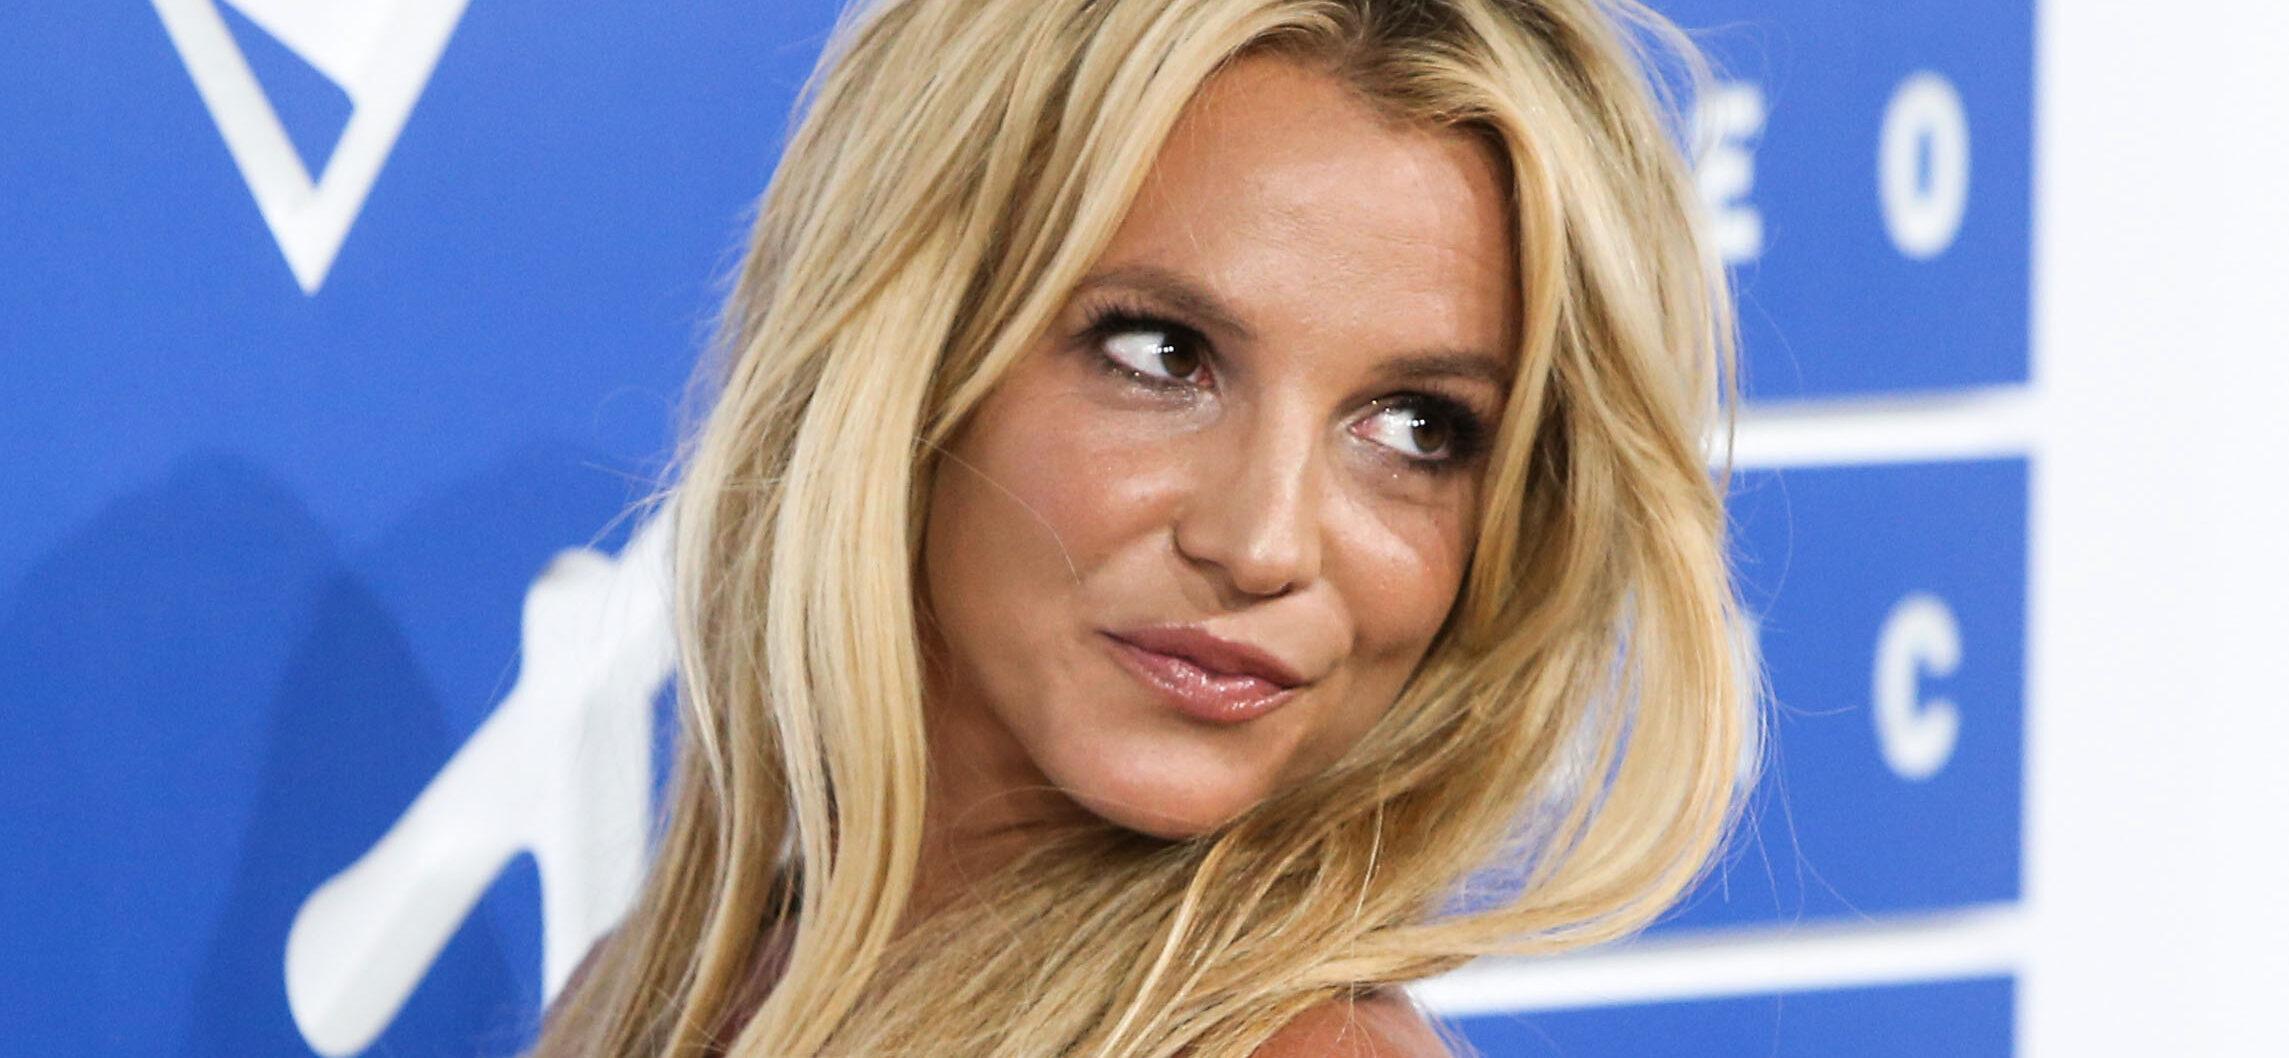 Britney Spears calls Tom Hardy "the British guy"